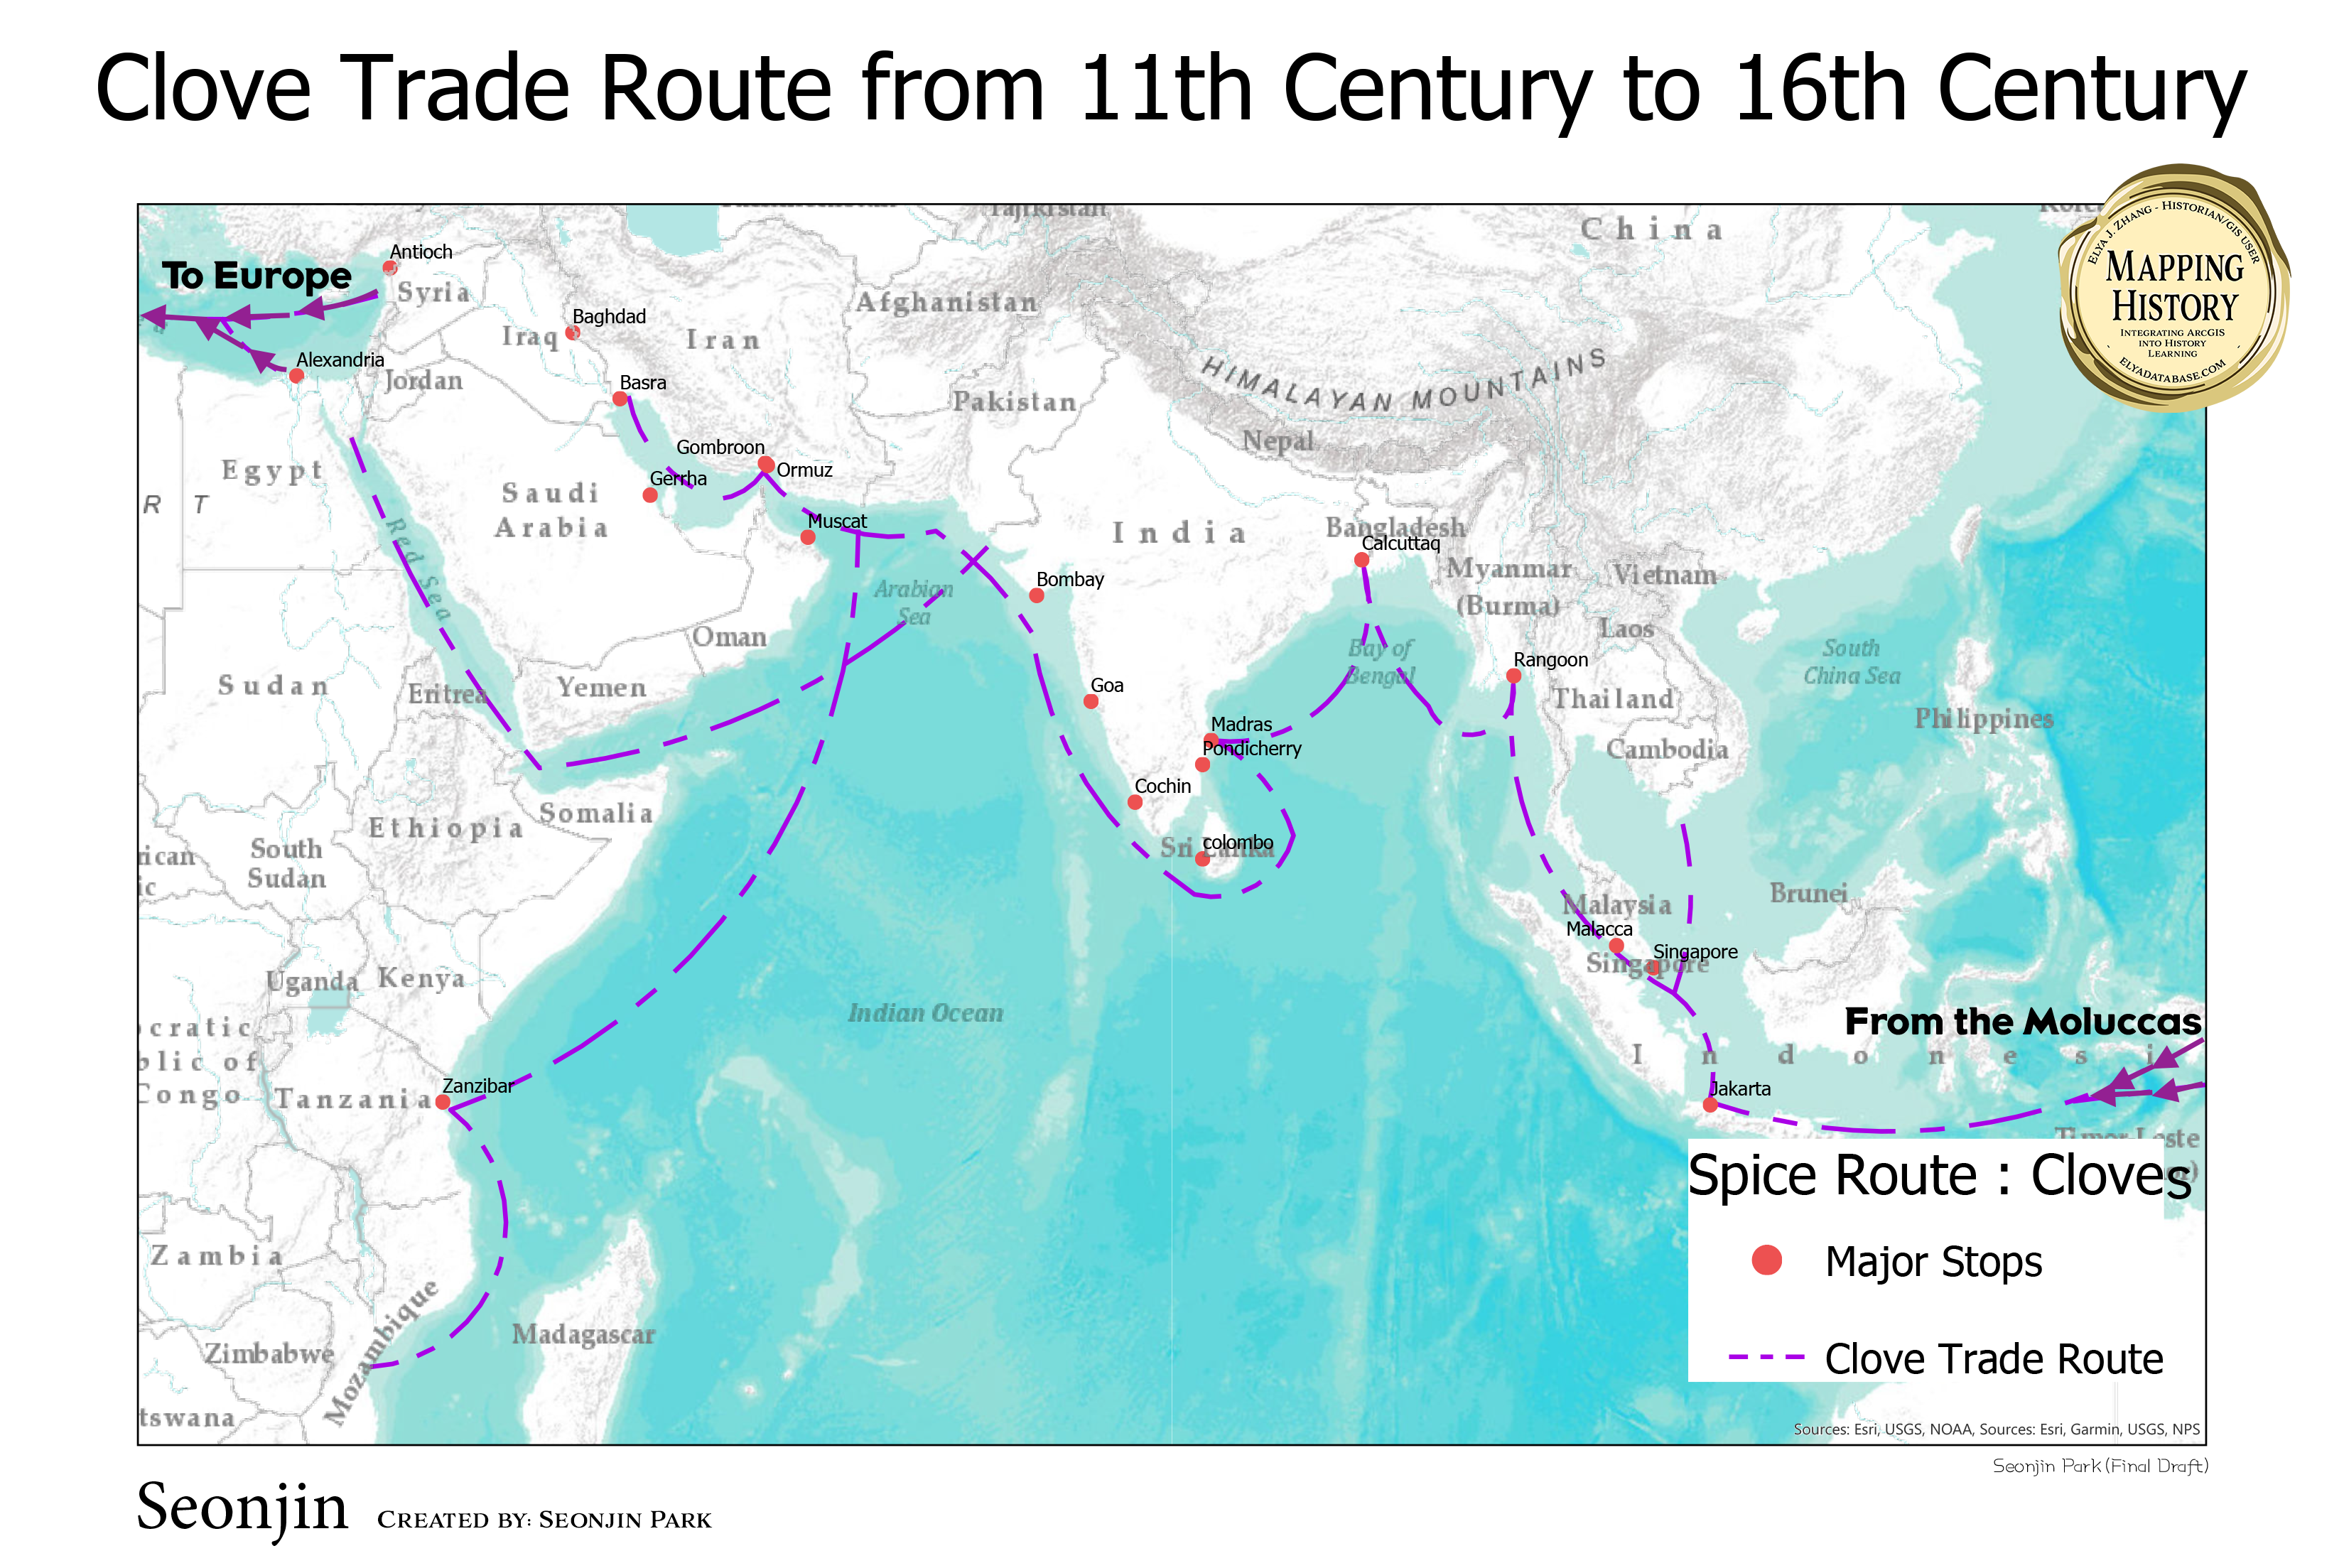 Clove Trade Route from 11th Century to 16th Century